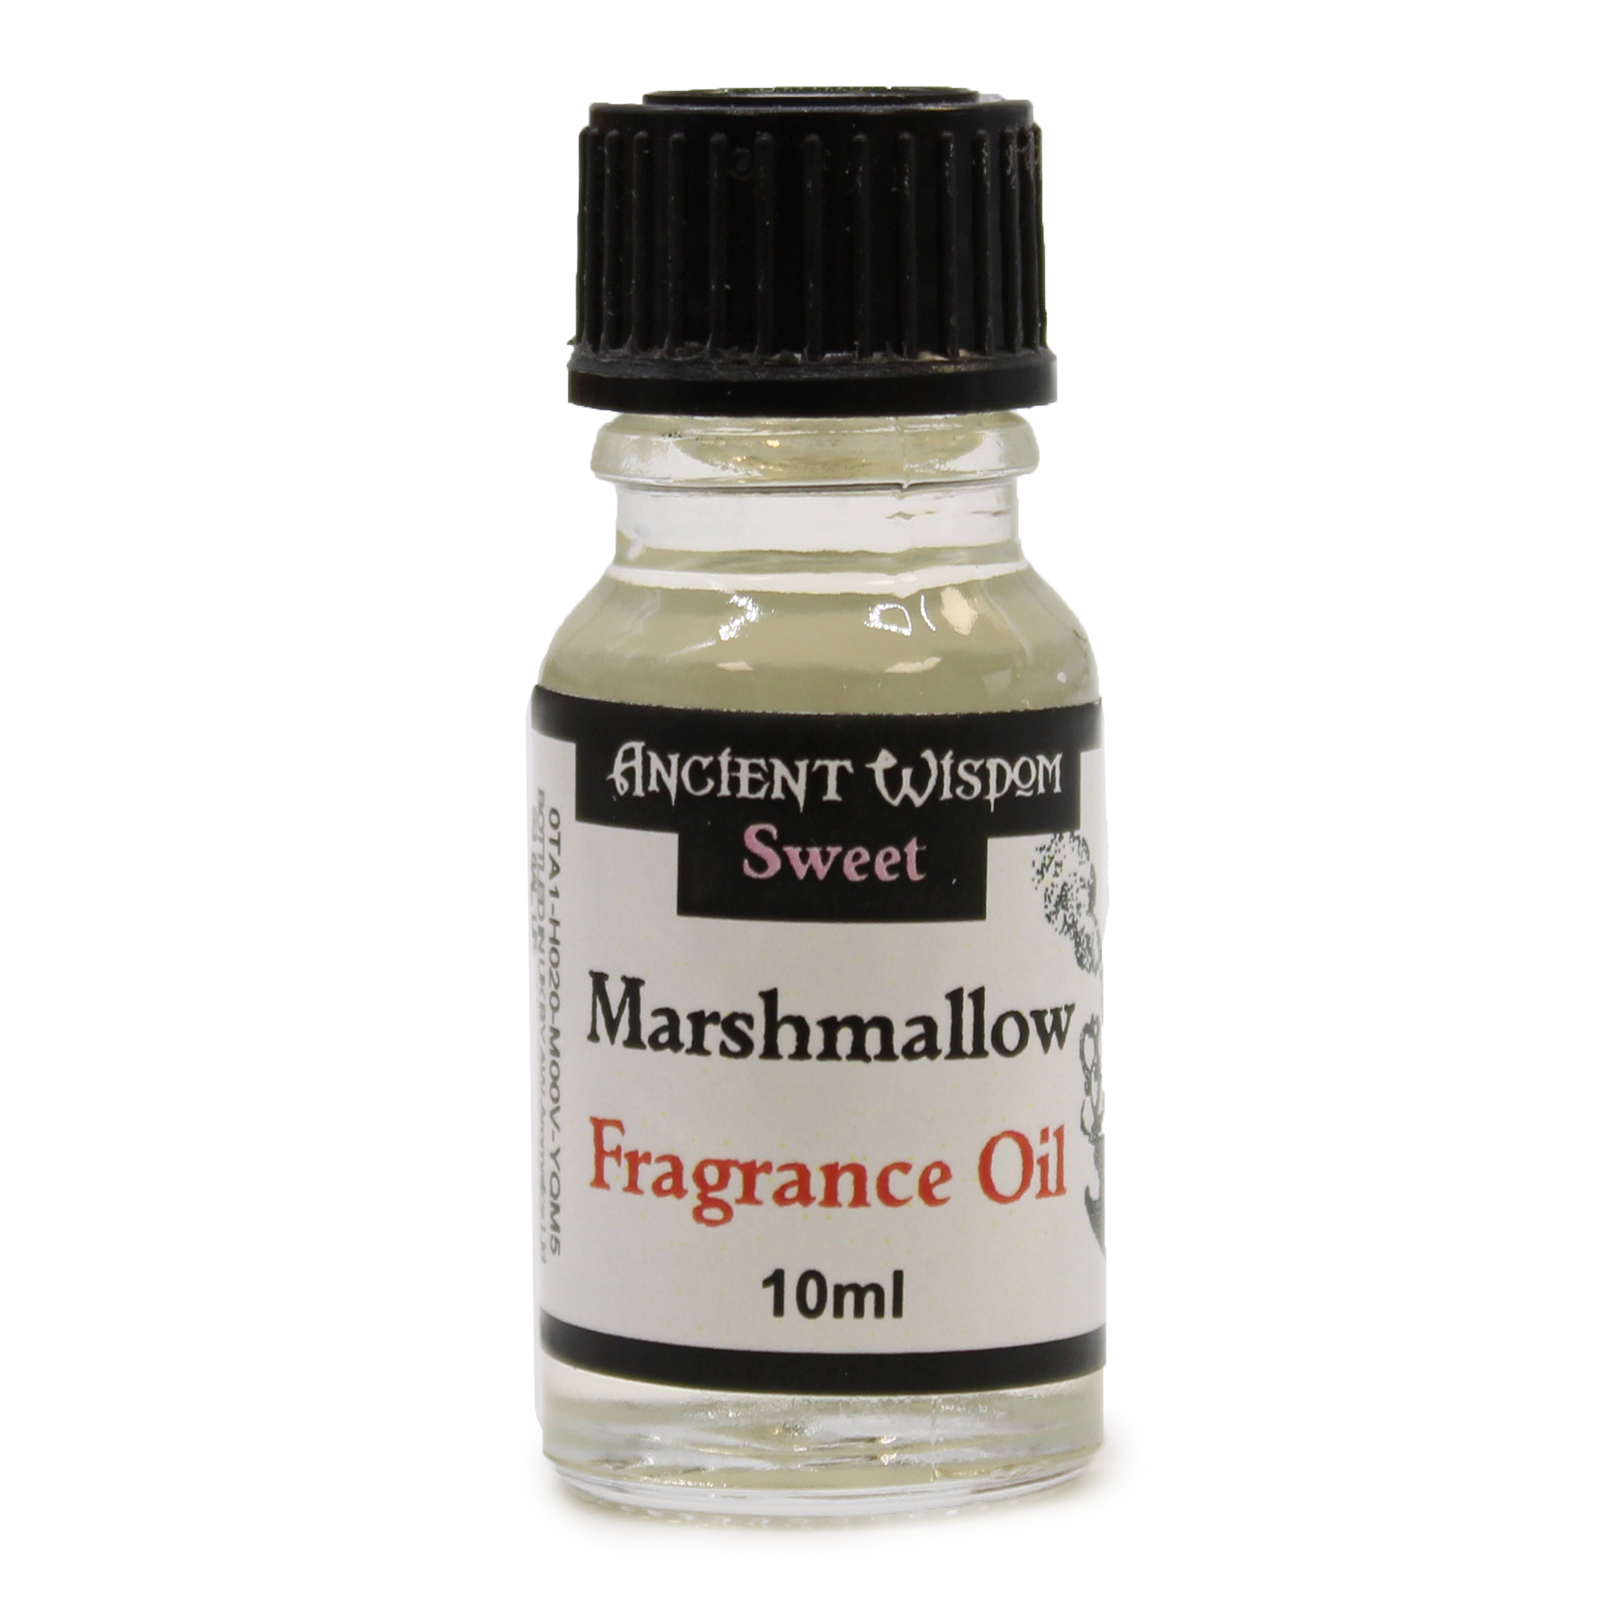 2 x 10ml Marshmallow Fragrance Oil Bottles - Click Image to Close